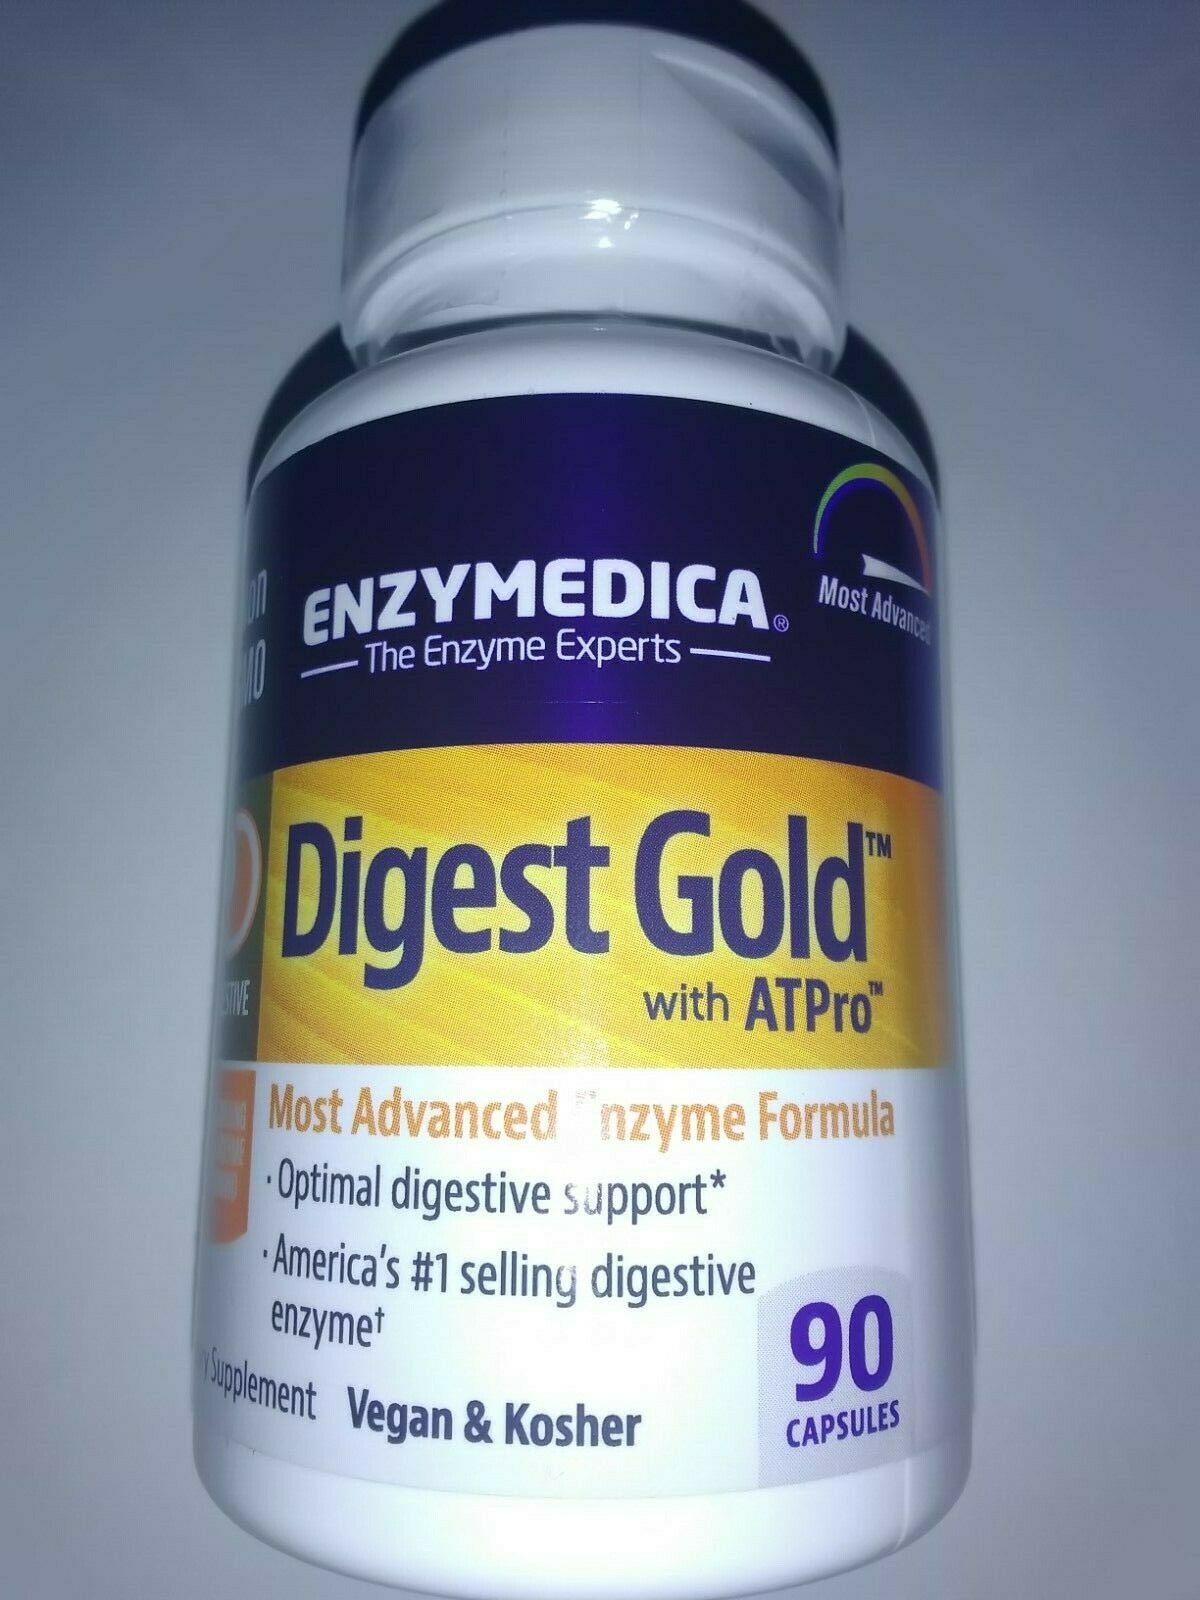 NEW!! Enzymedica Digest Gold Most Advanced Enzyme 90 Capsules + ATPro